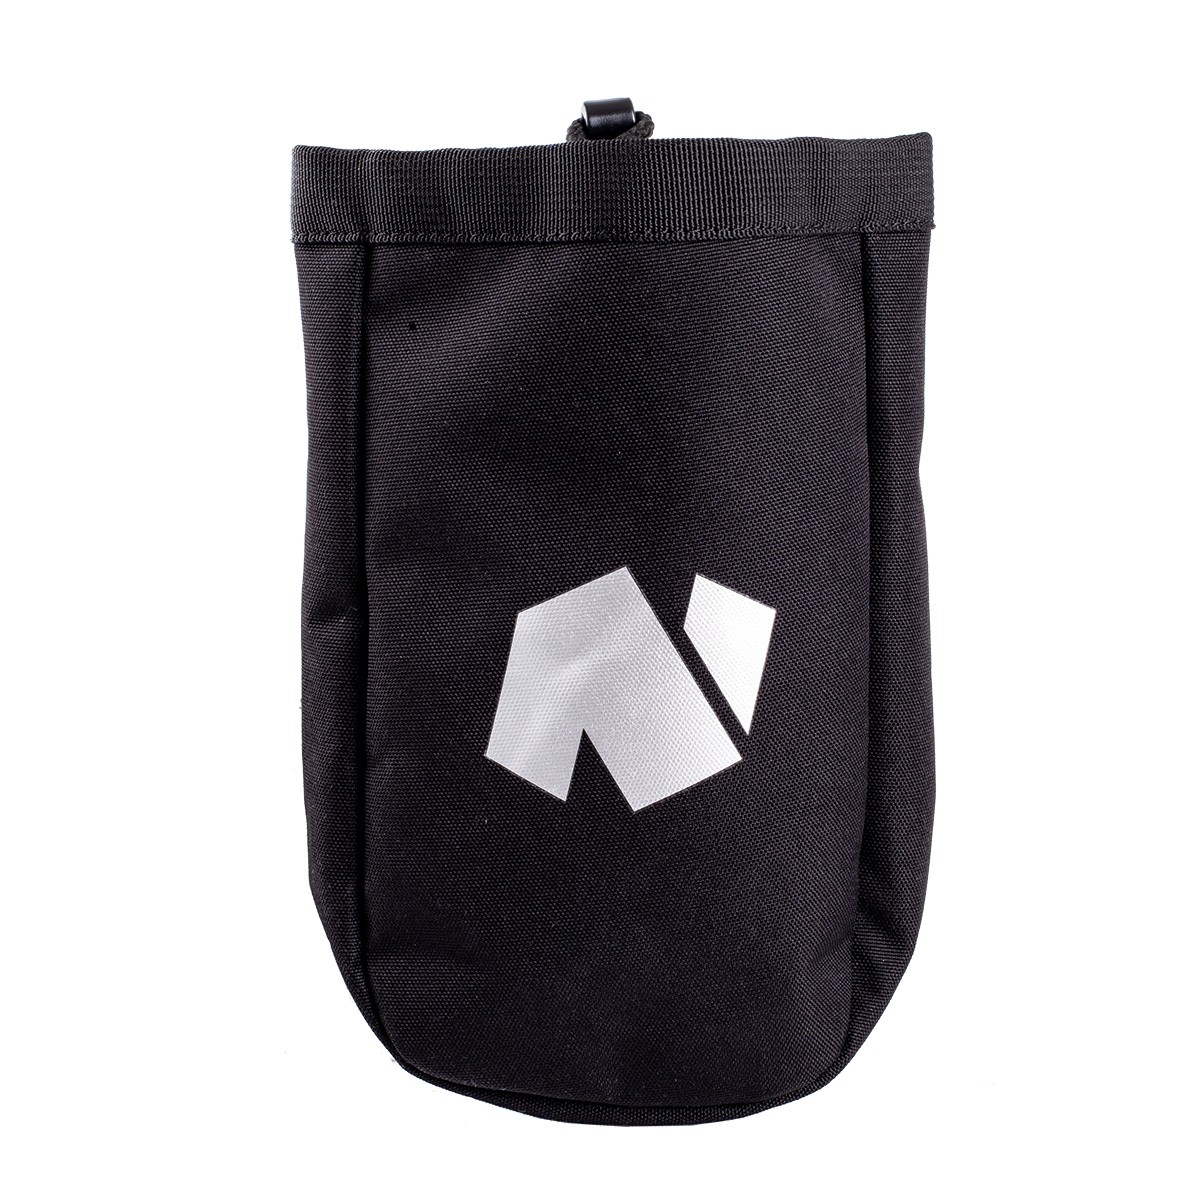 NOTCH 磁扣工具袋 MAGNETIC DITTY BAG